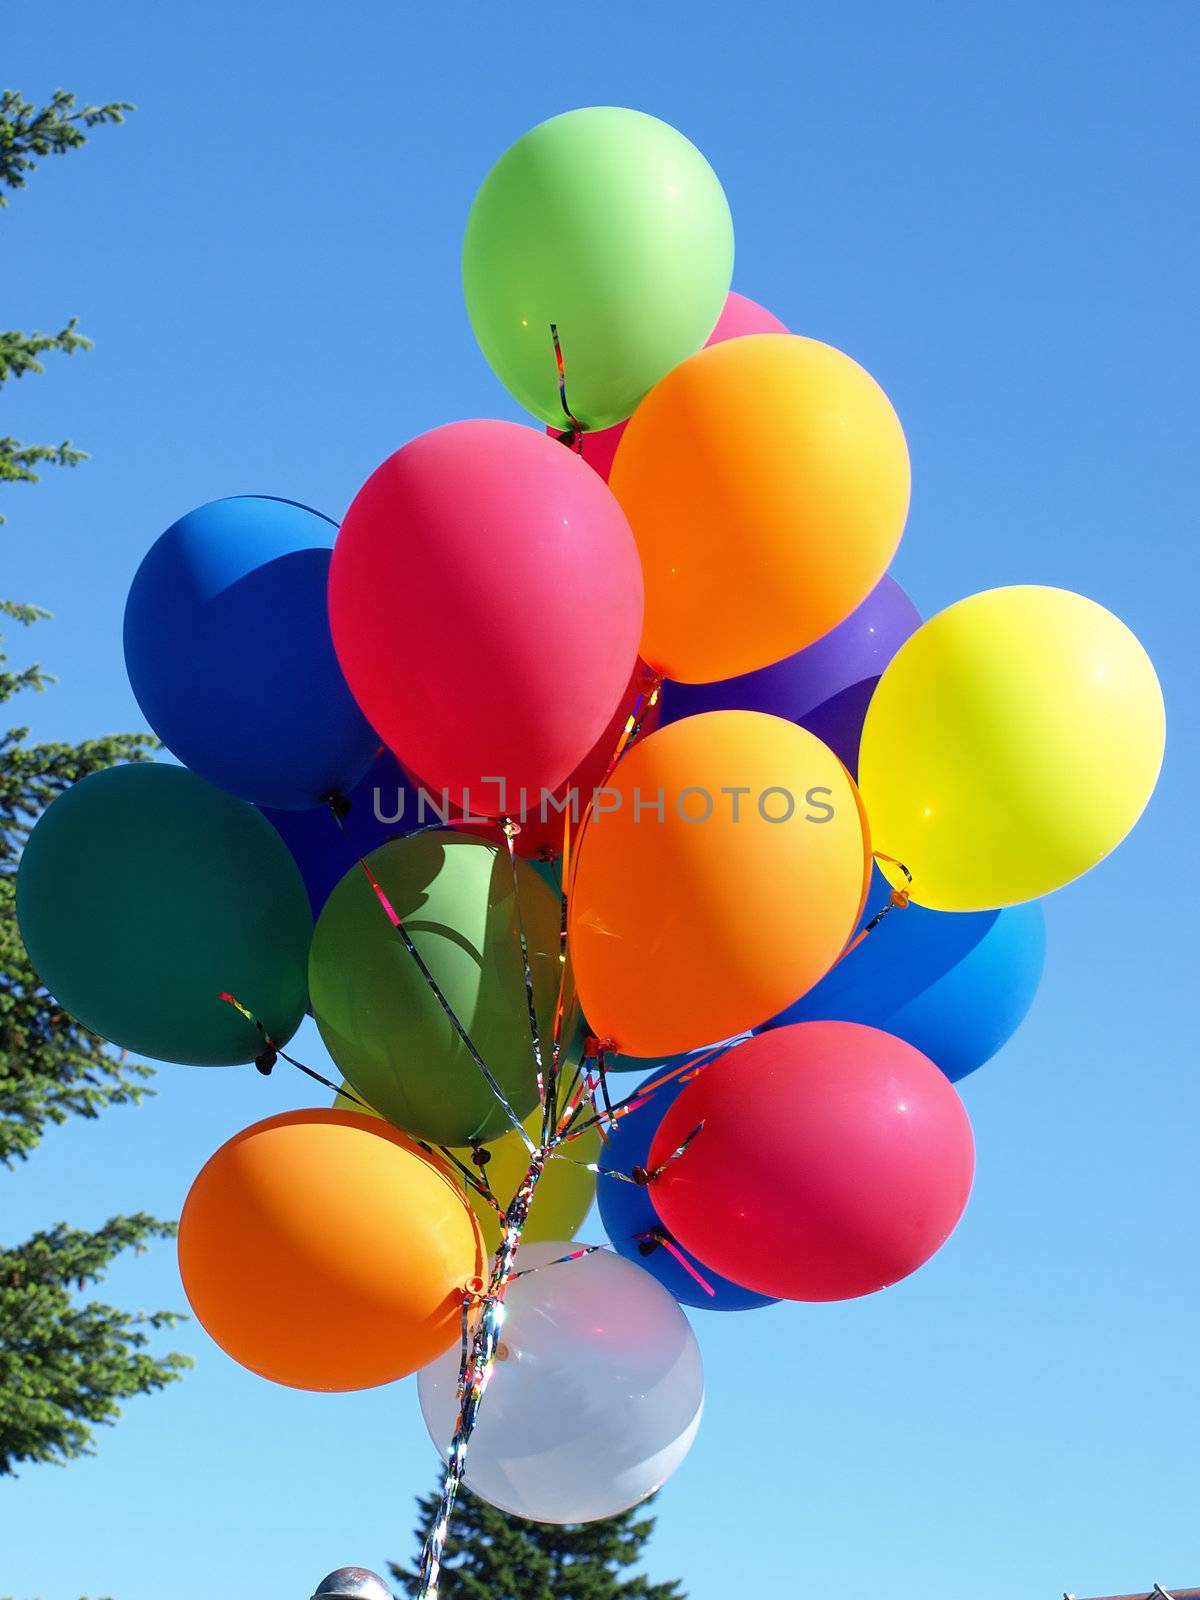 A colorful bouquet of balloons in the sky